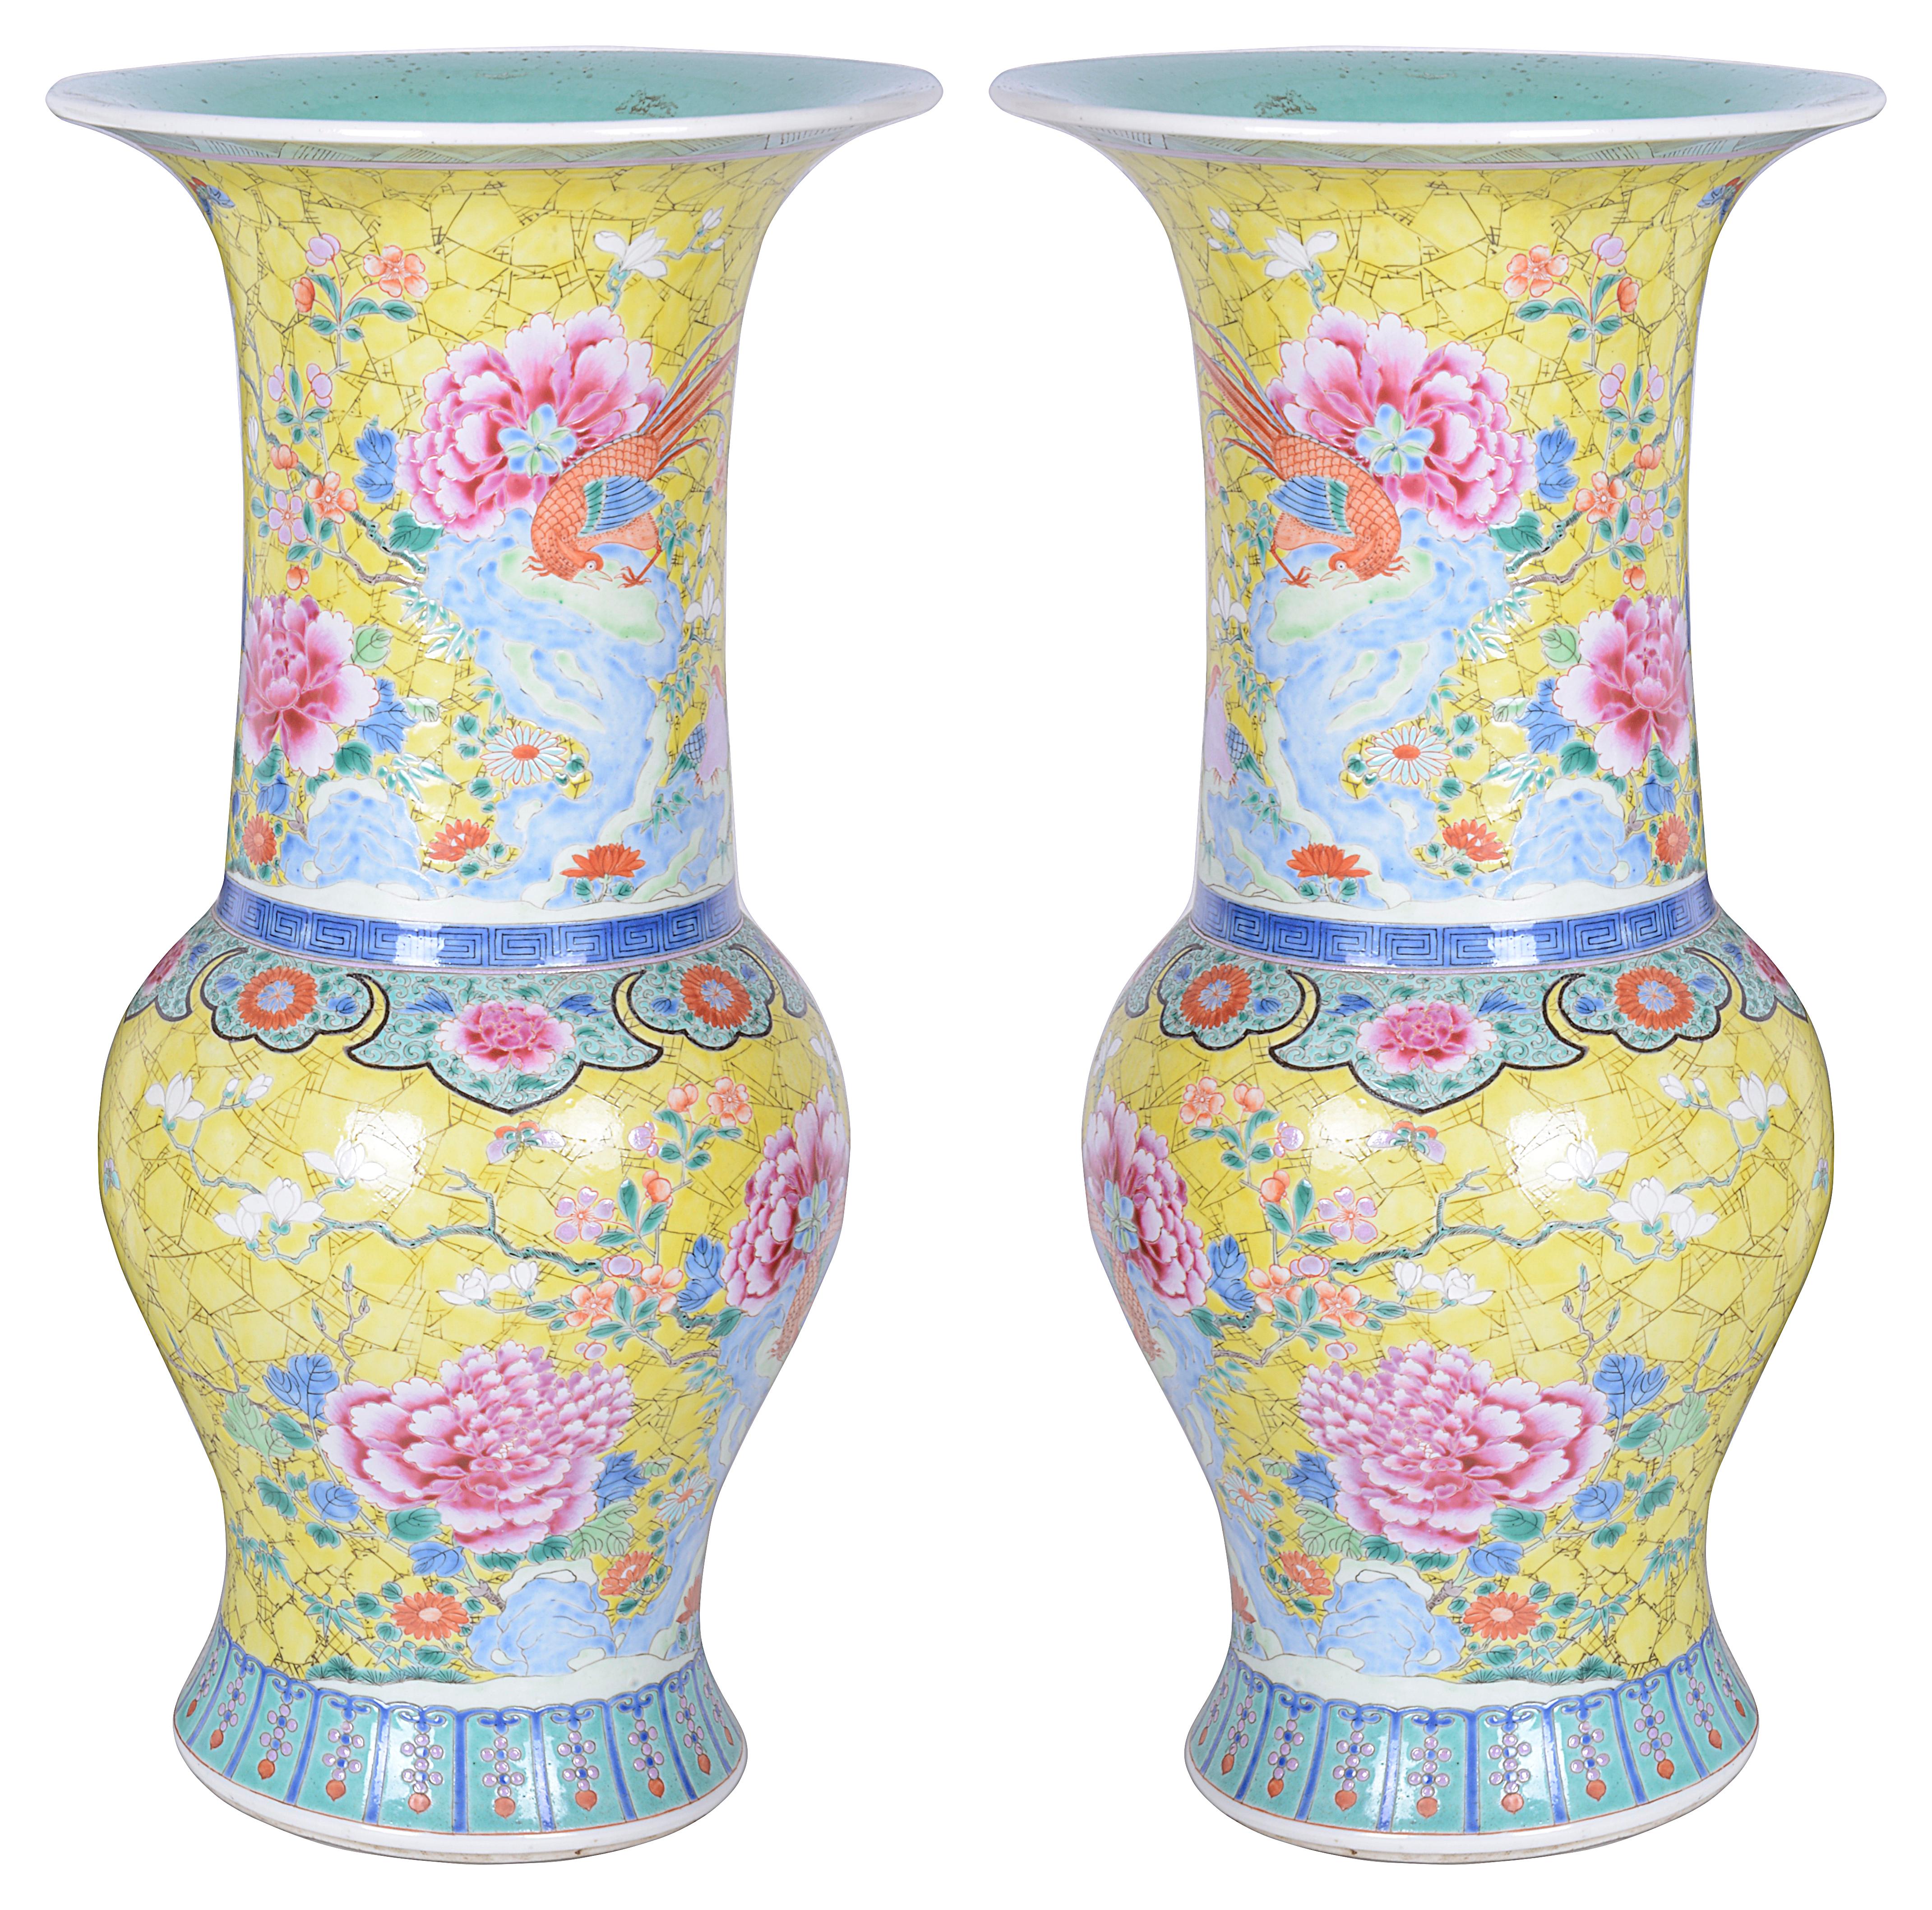 A beautiful pair of late 19th century Chinese famille rose vases / lamps, each having Yellow ground with ecotic birds and flowers.